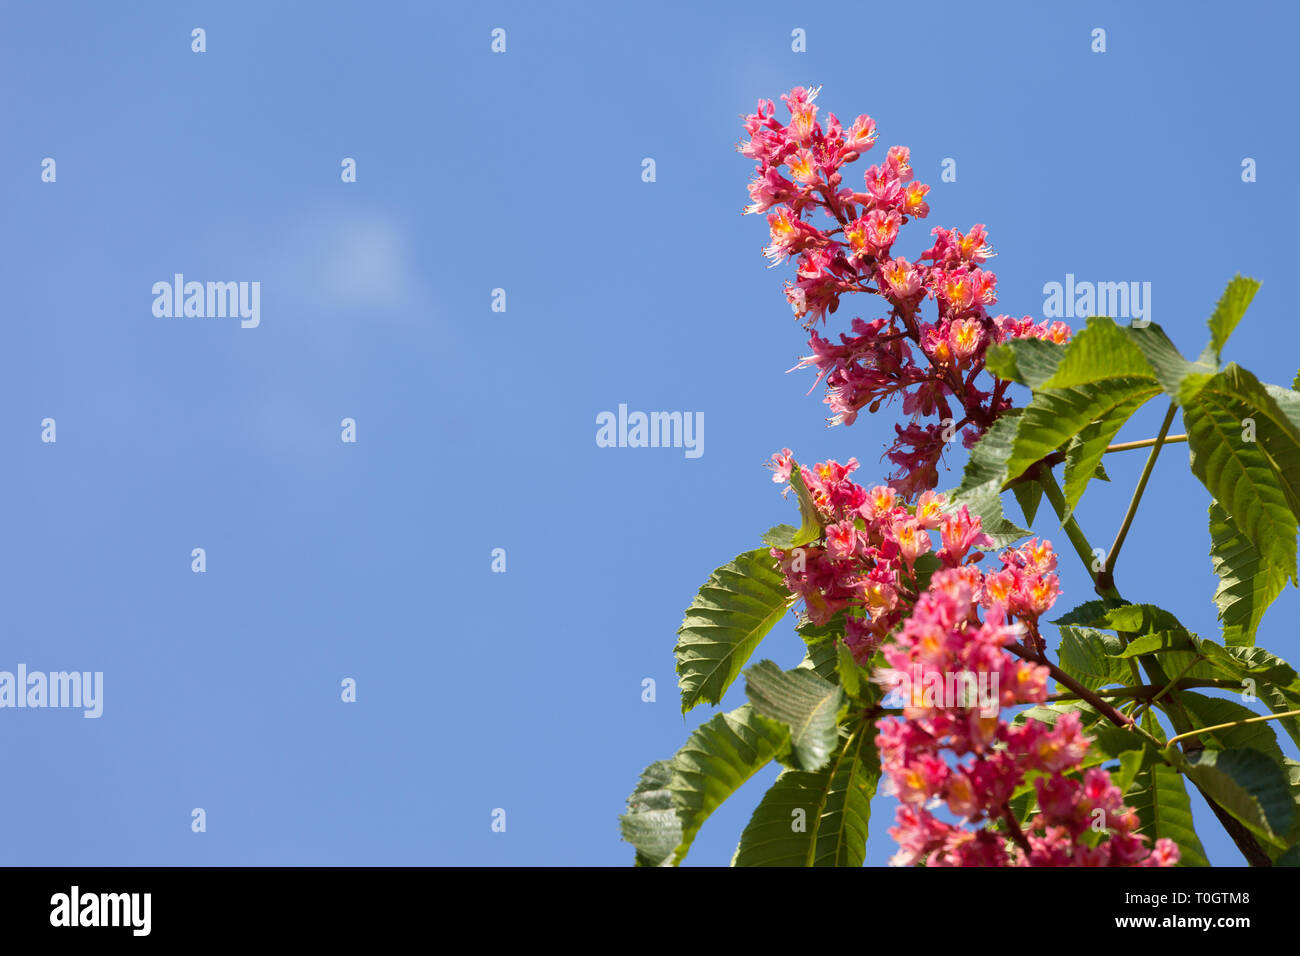 Horse chestnut tree Aesculus carnea with pink blossom flowers on blue sky background at sunny spring day. Stock Photo